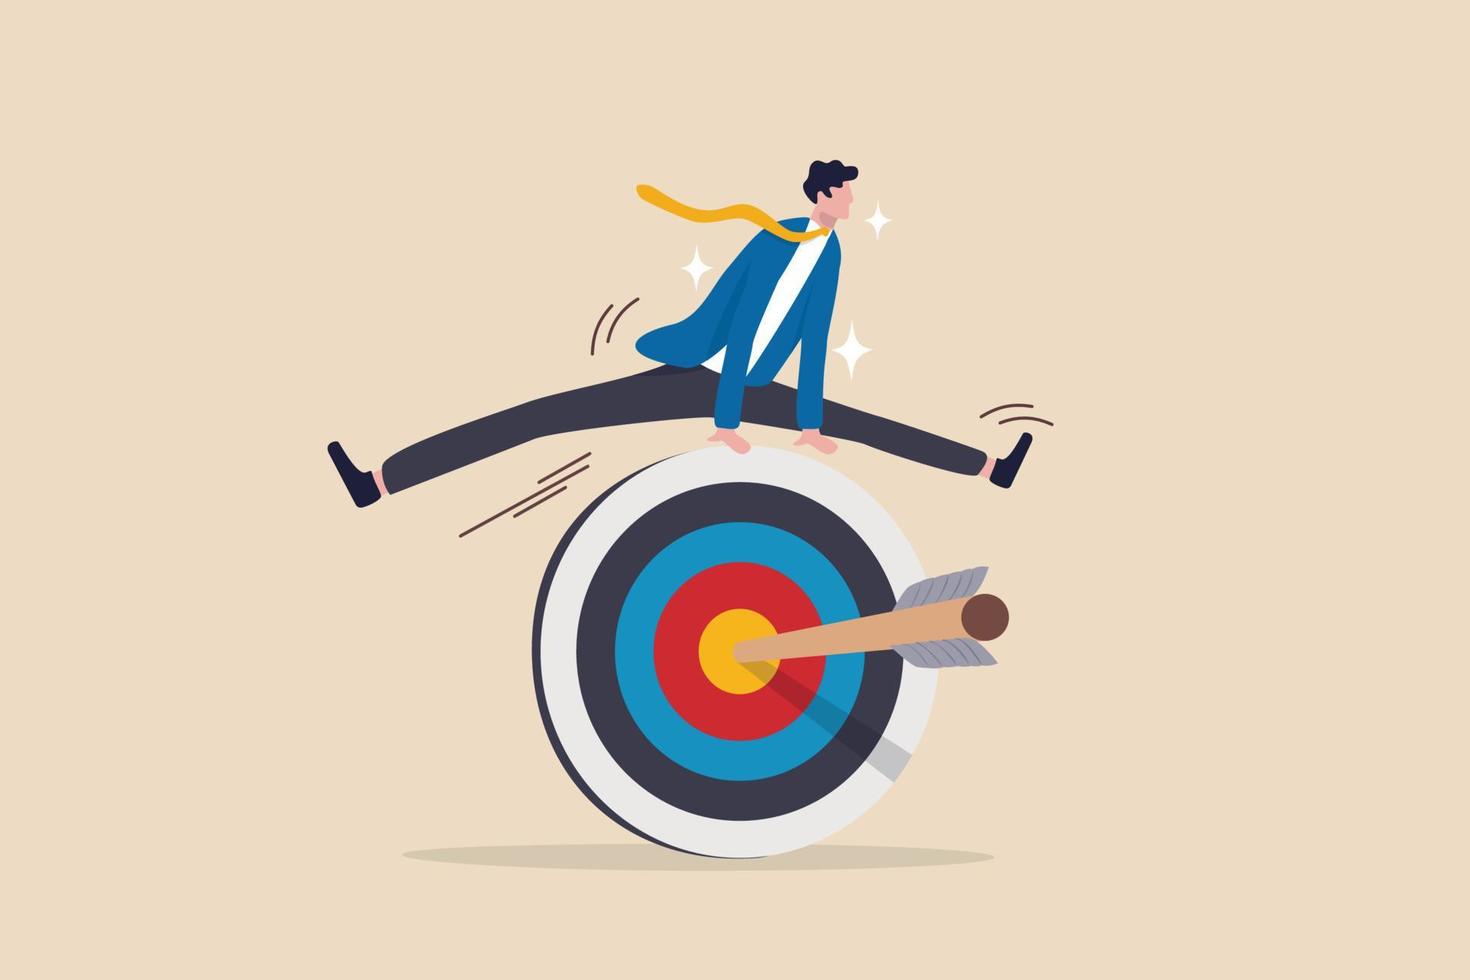 Achieve target, reaching goal or obtain business objective and purpose, accomplishment, success mission or victory concept, success skillful businessman jumping over arrow hit bullseye target. vector